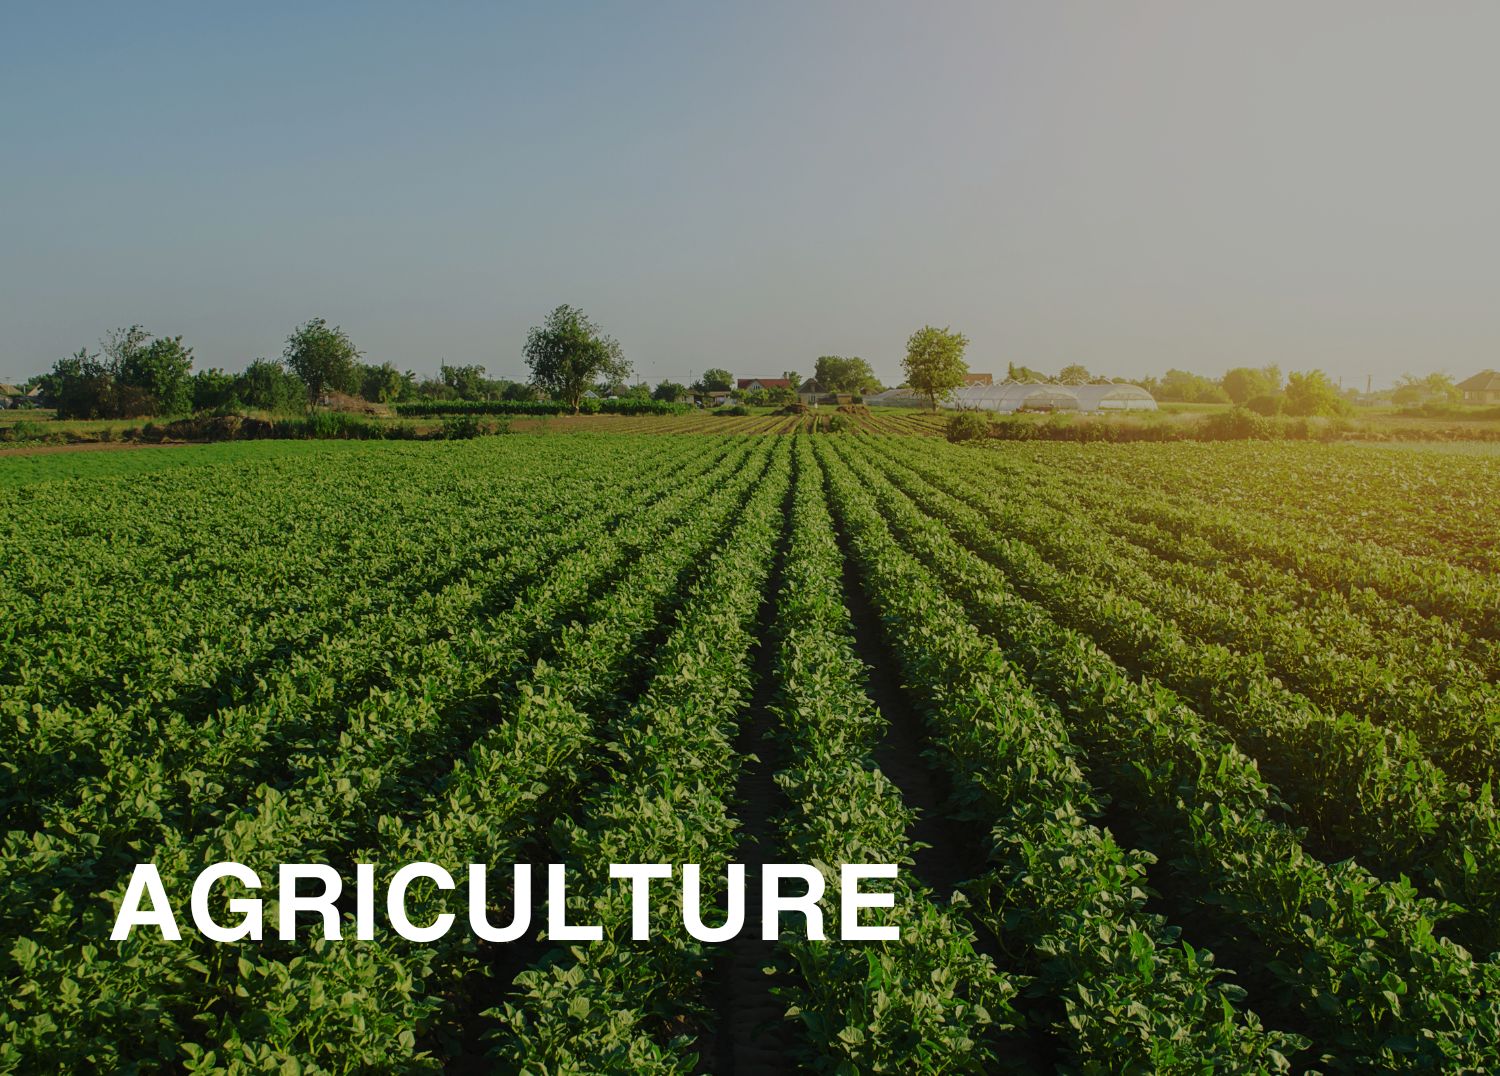 agriculture industry